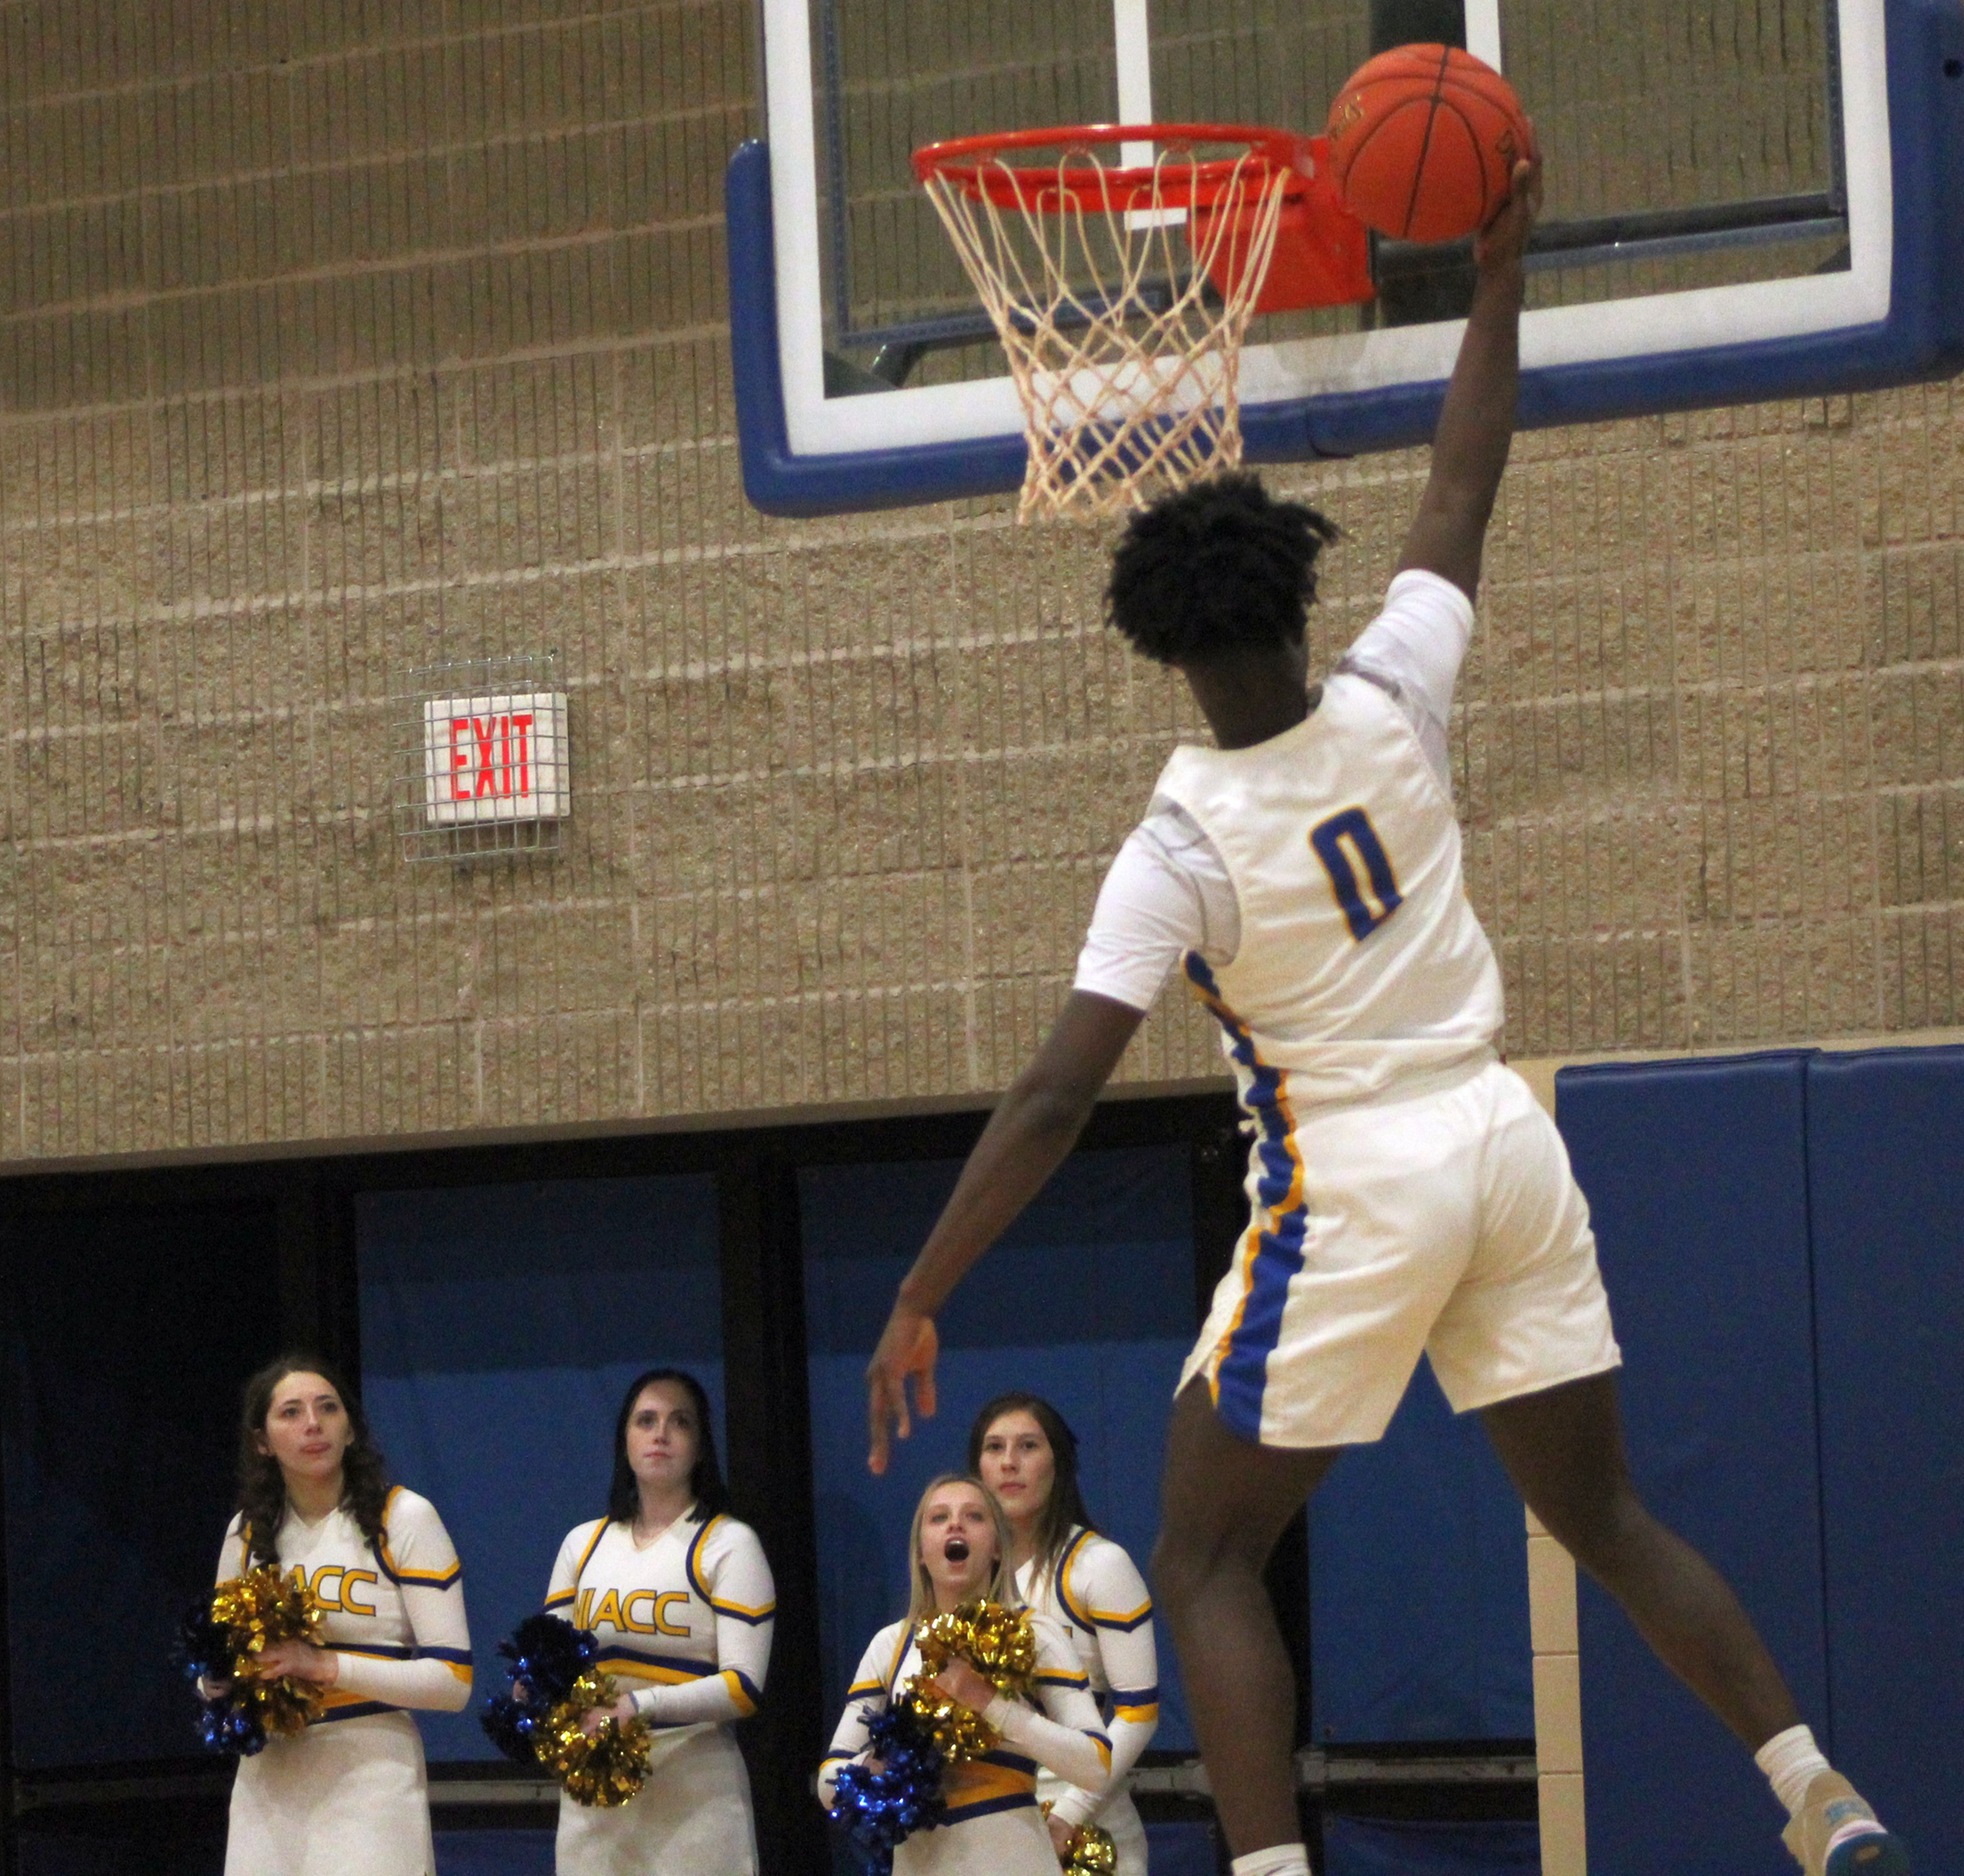 NIACC's Myles Tucker scores 2 of his career-high 37 points in Wednesday's home game against Iowa Western.